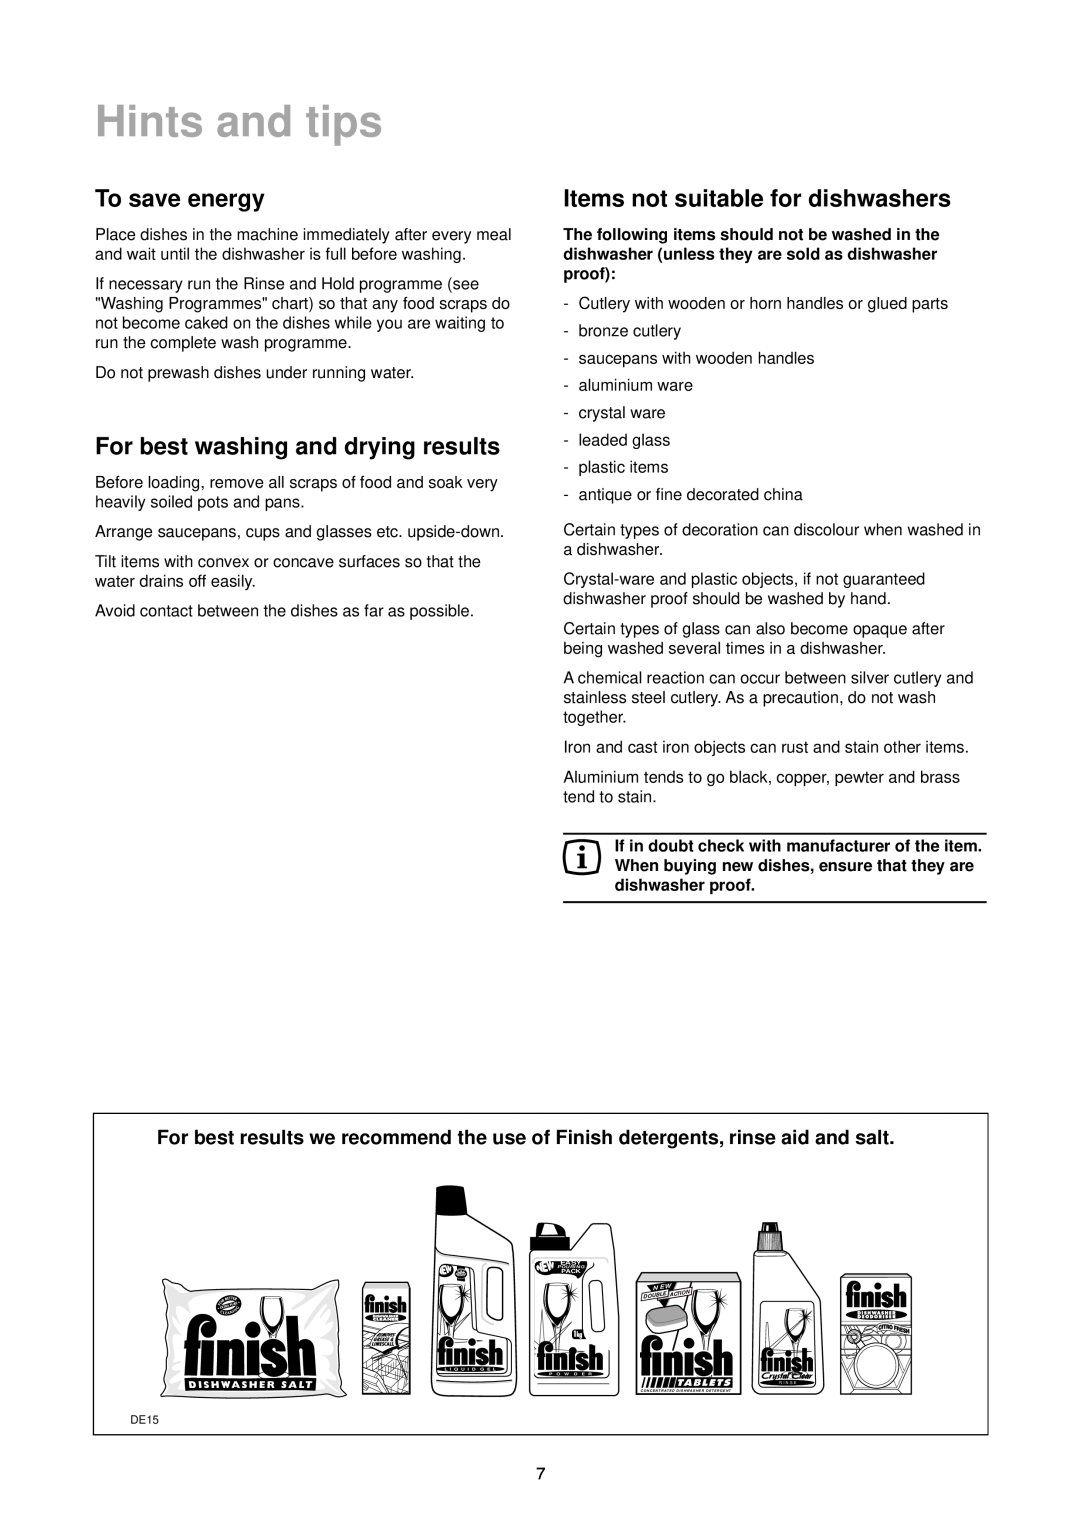 Tricity Bendix CDW 101 manual Hints and tips, To save energy, For best washing and drying results 